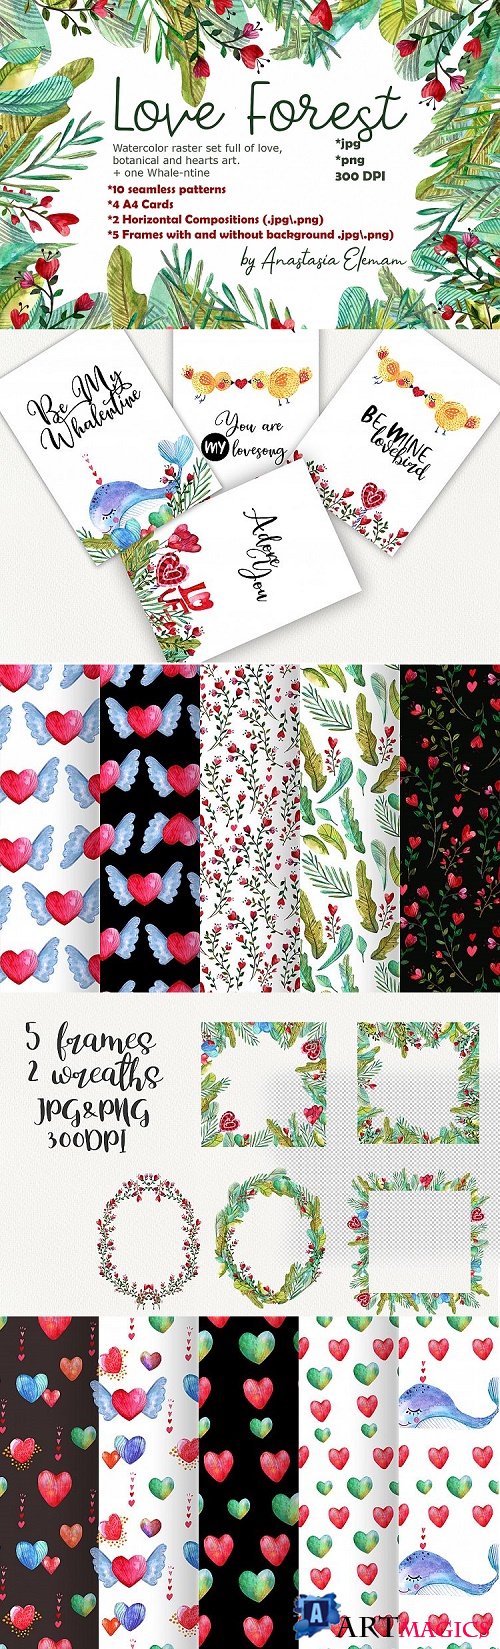 Love forest watercolor set with patterns, cards, wreaths - 476749